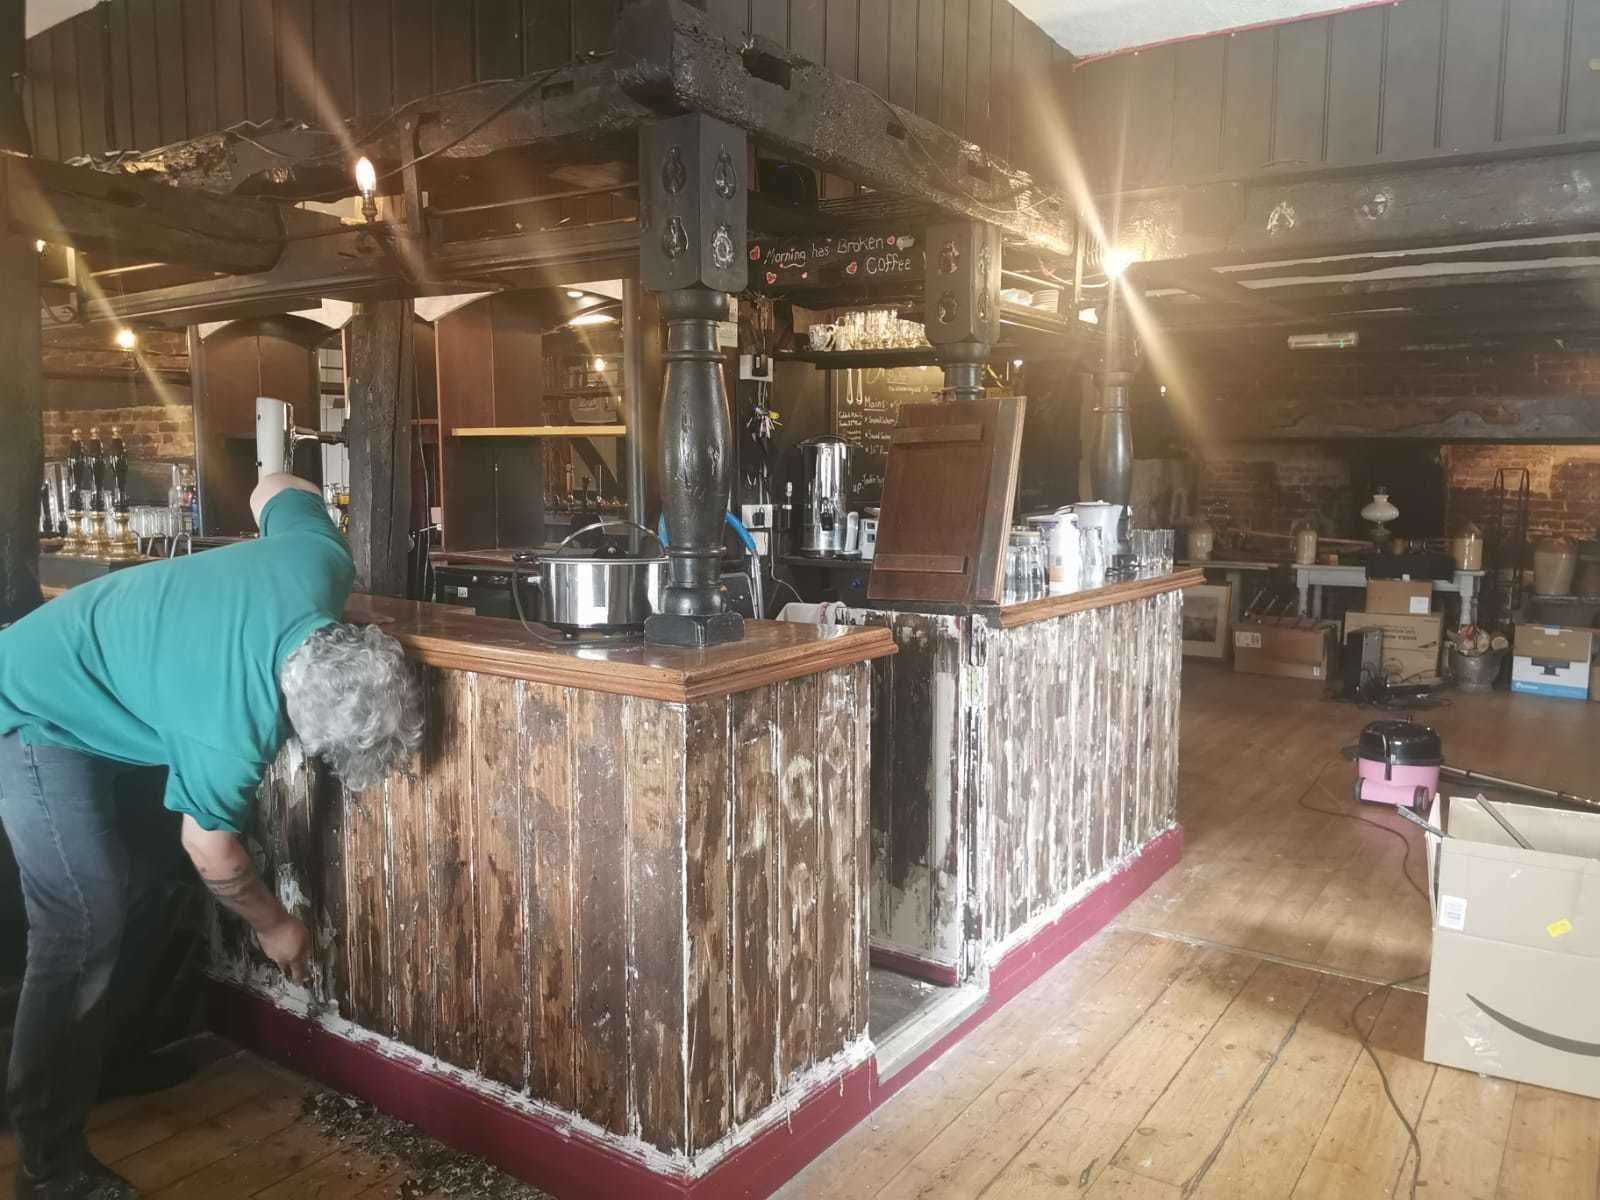 Lee working to restore the bar during the refurbishment